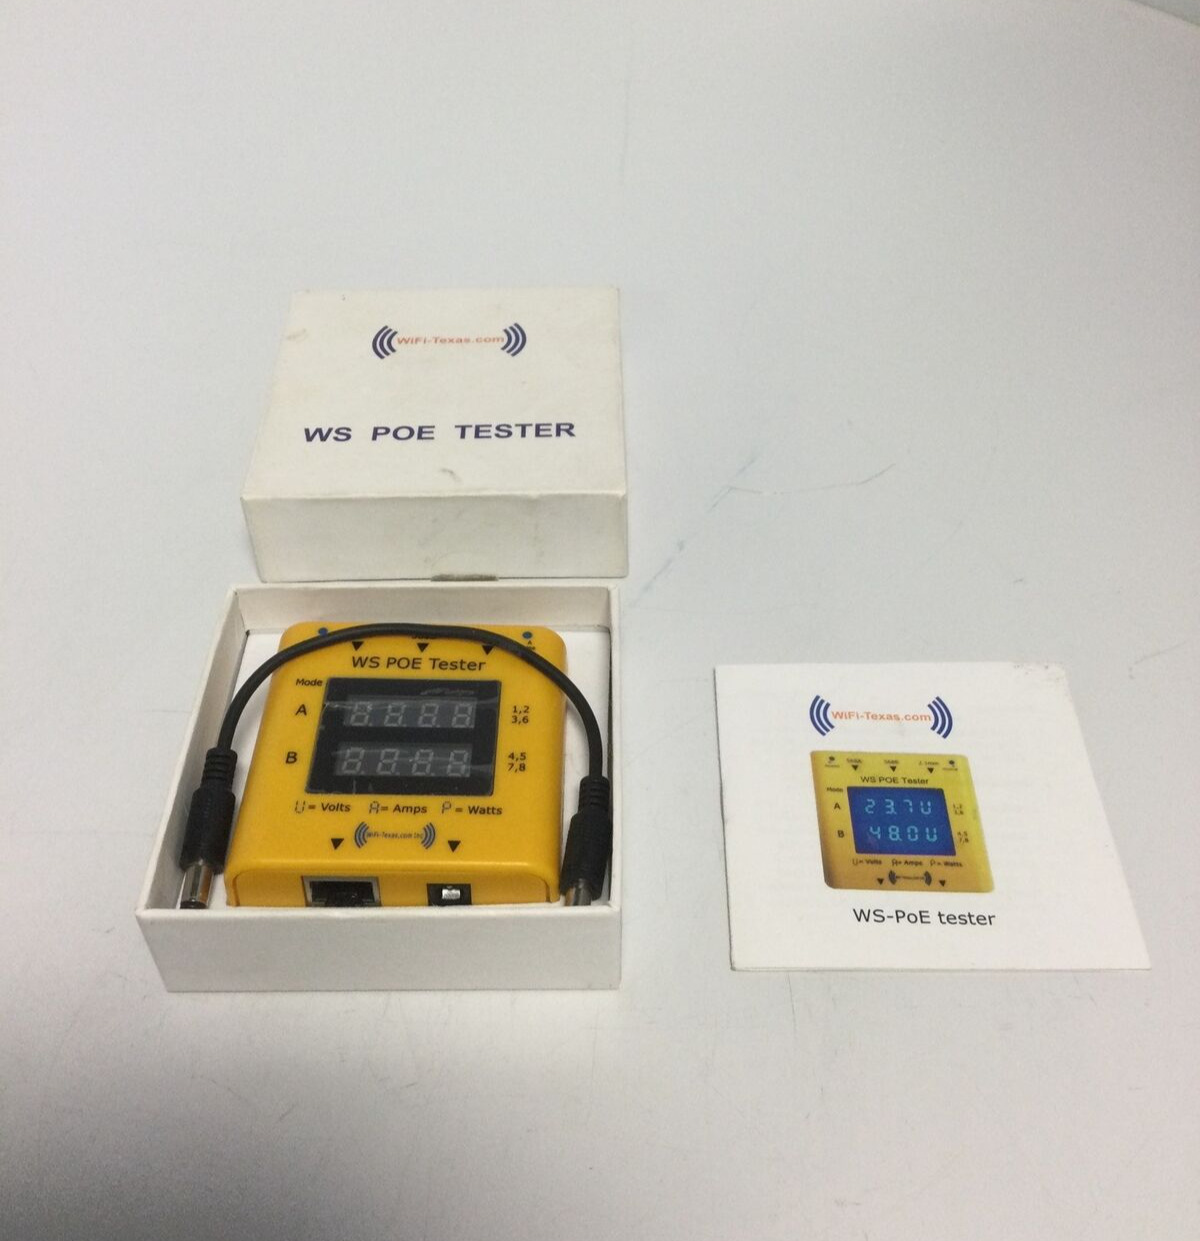 NEW, PoE TEXAS, WS-POE- TESTER, VOLTS, AMPS, WATTS. (1i-3)